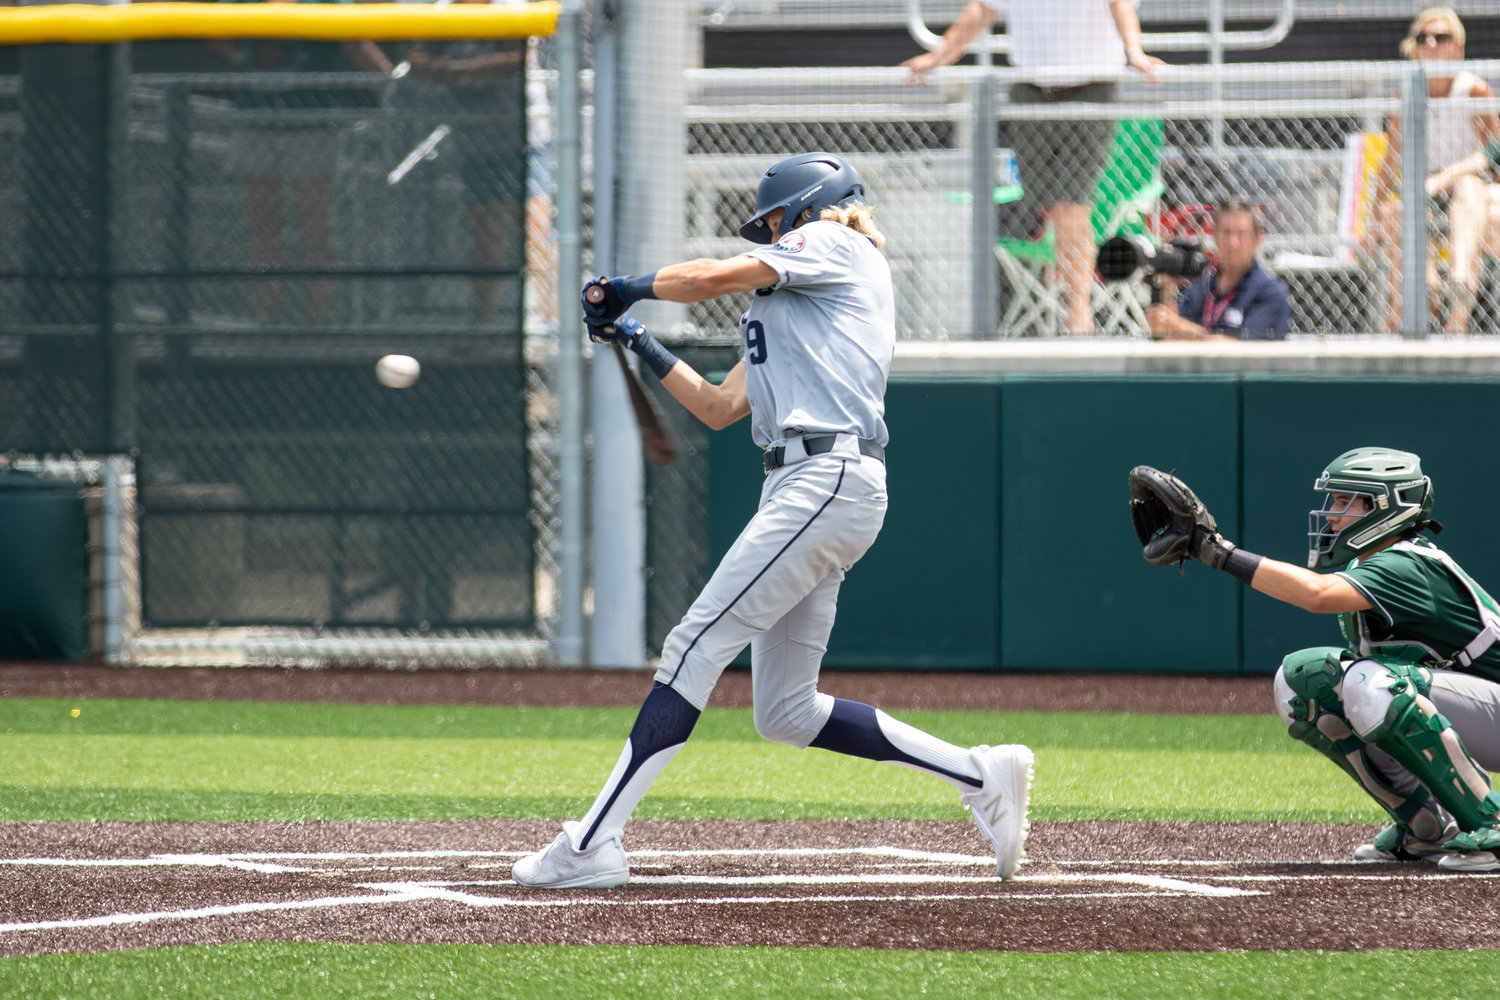 Tompkins sophomore Drew Markle takes a swing during Game 3 of the Falcons’ Region III-6A semifinals against Strake Jesuit last year at Cy-Falls High.